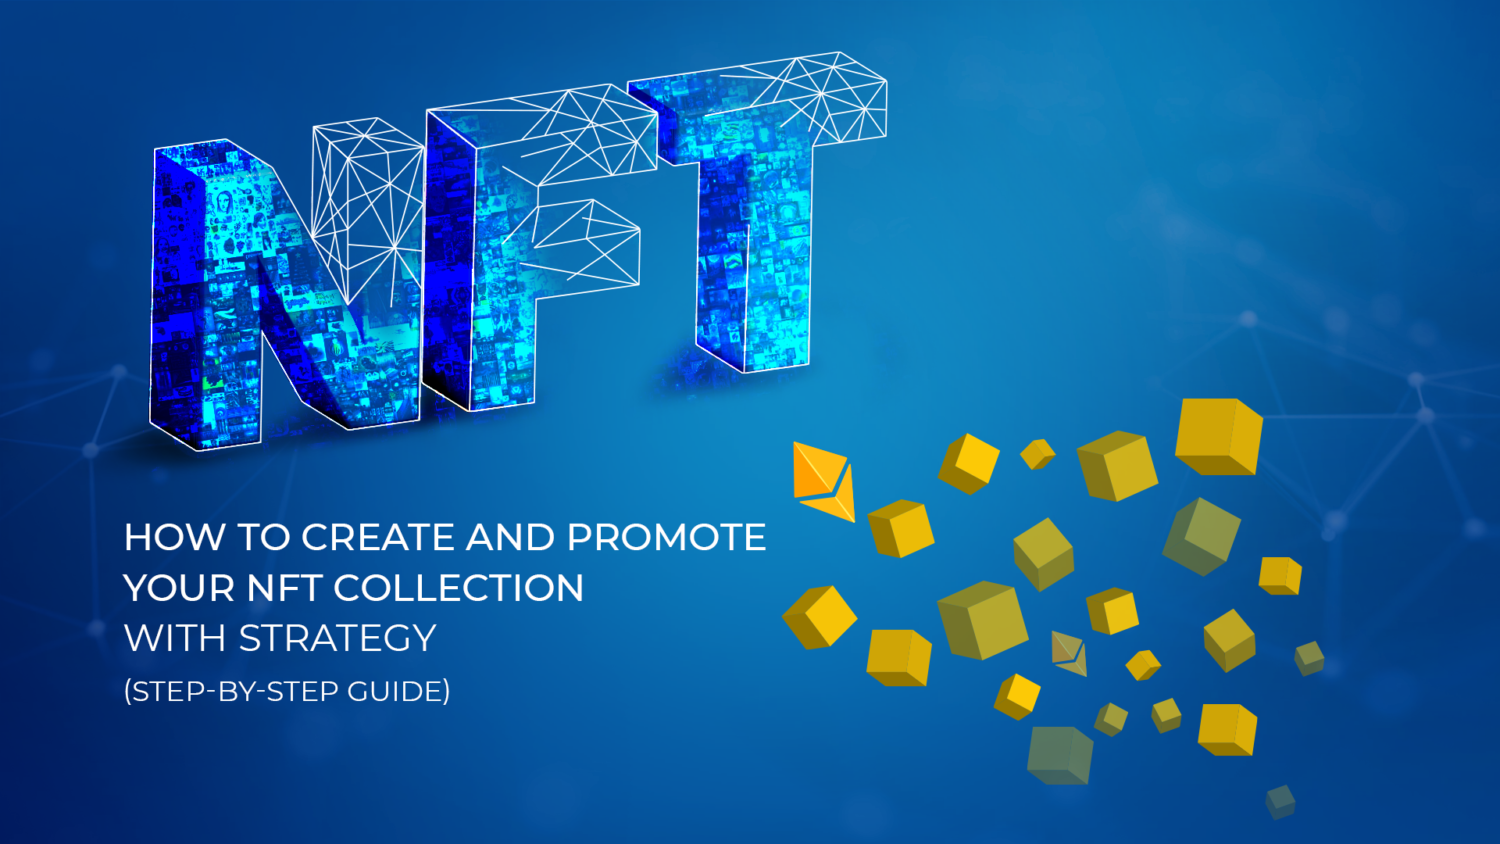 NFT creation and promotion with strategy